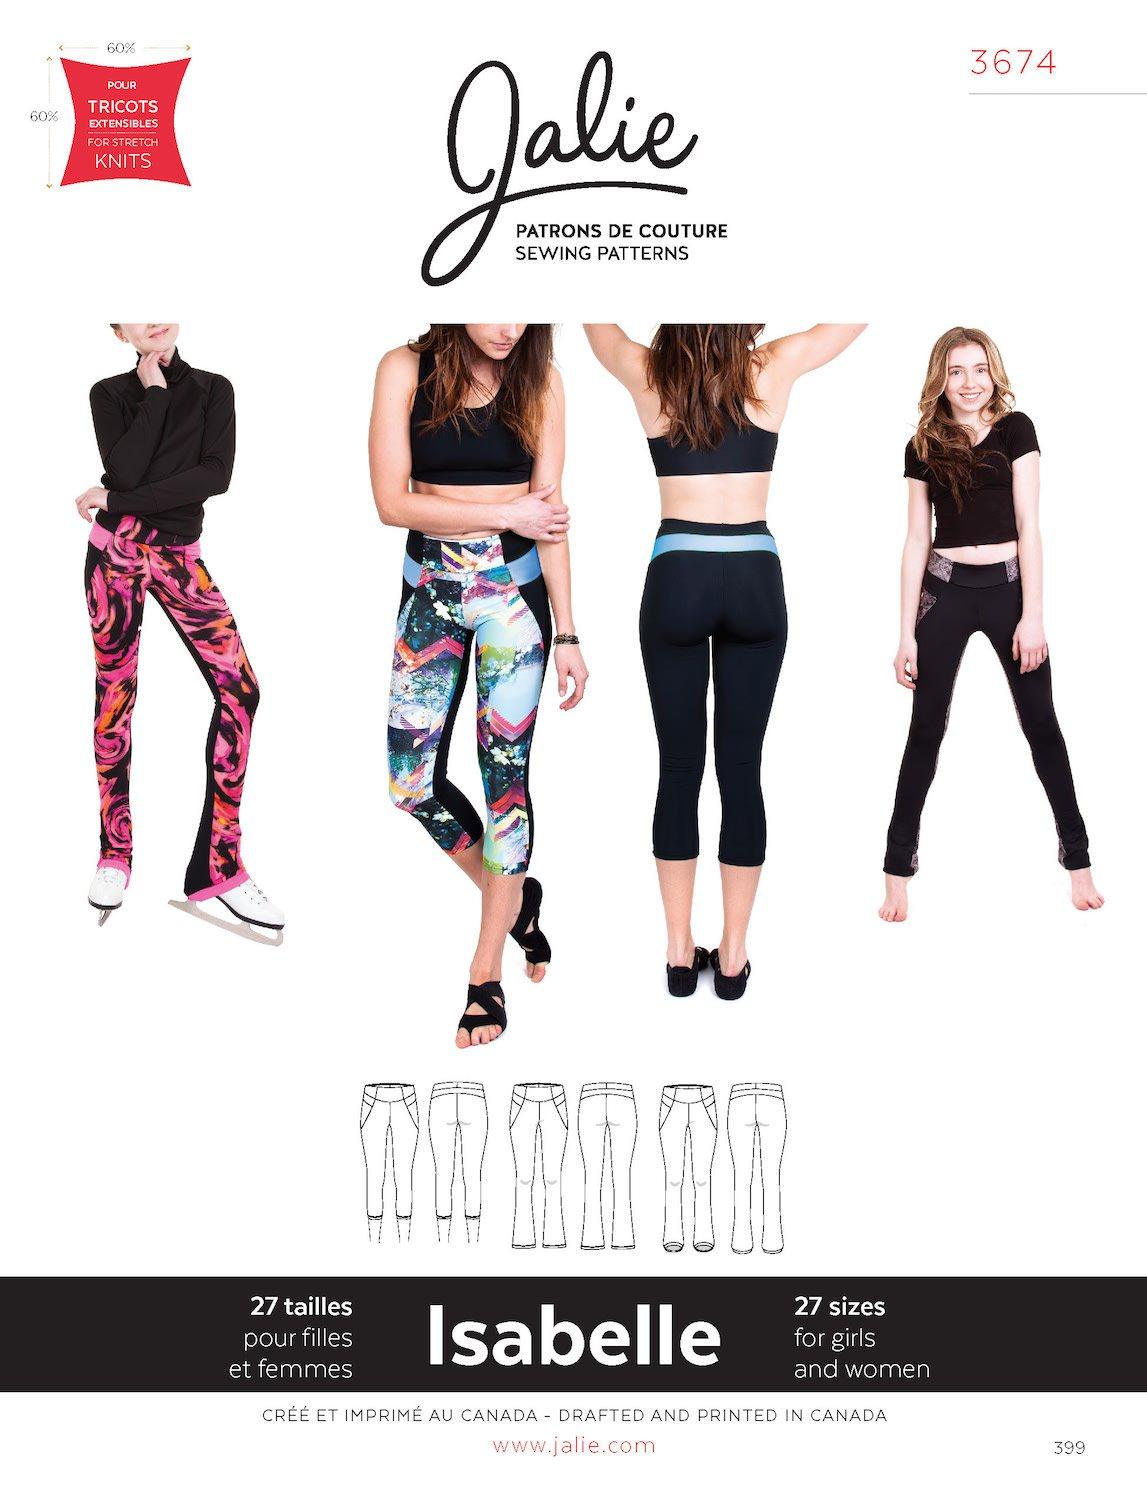 How to make a curved waistband  Sewing pattern sizes, Pdf sewing patterns,  Pants sewing pattern